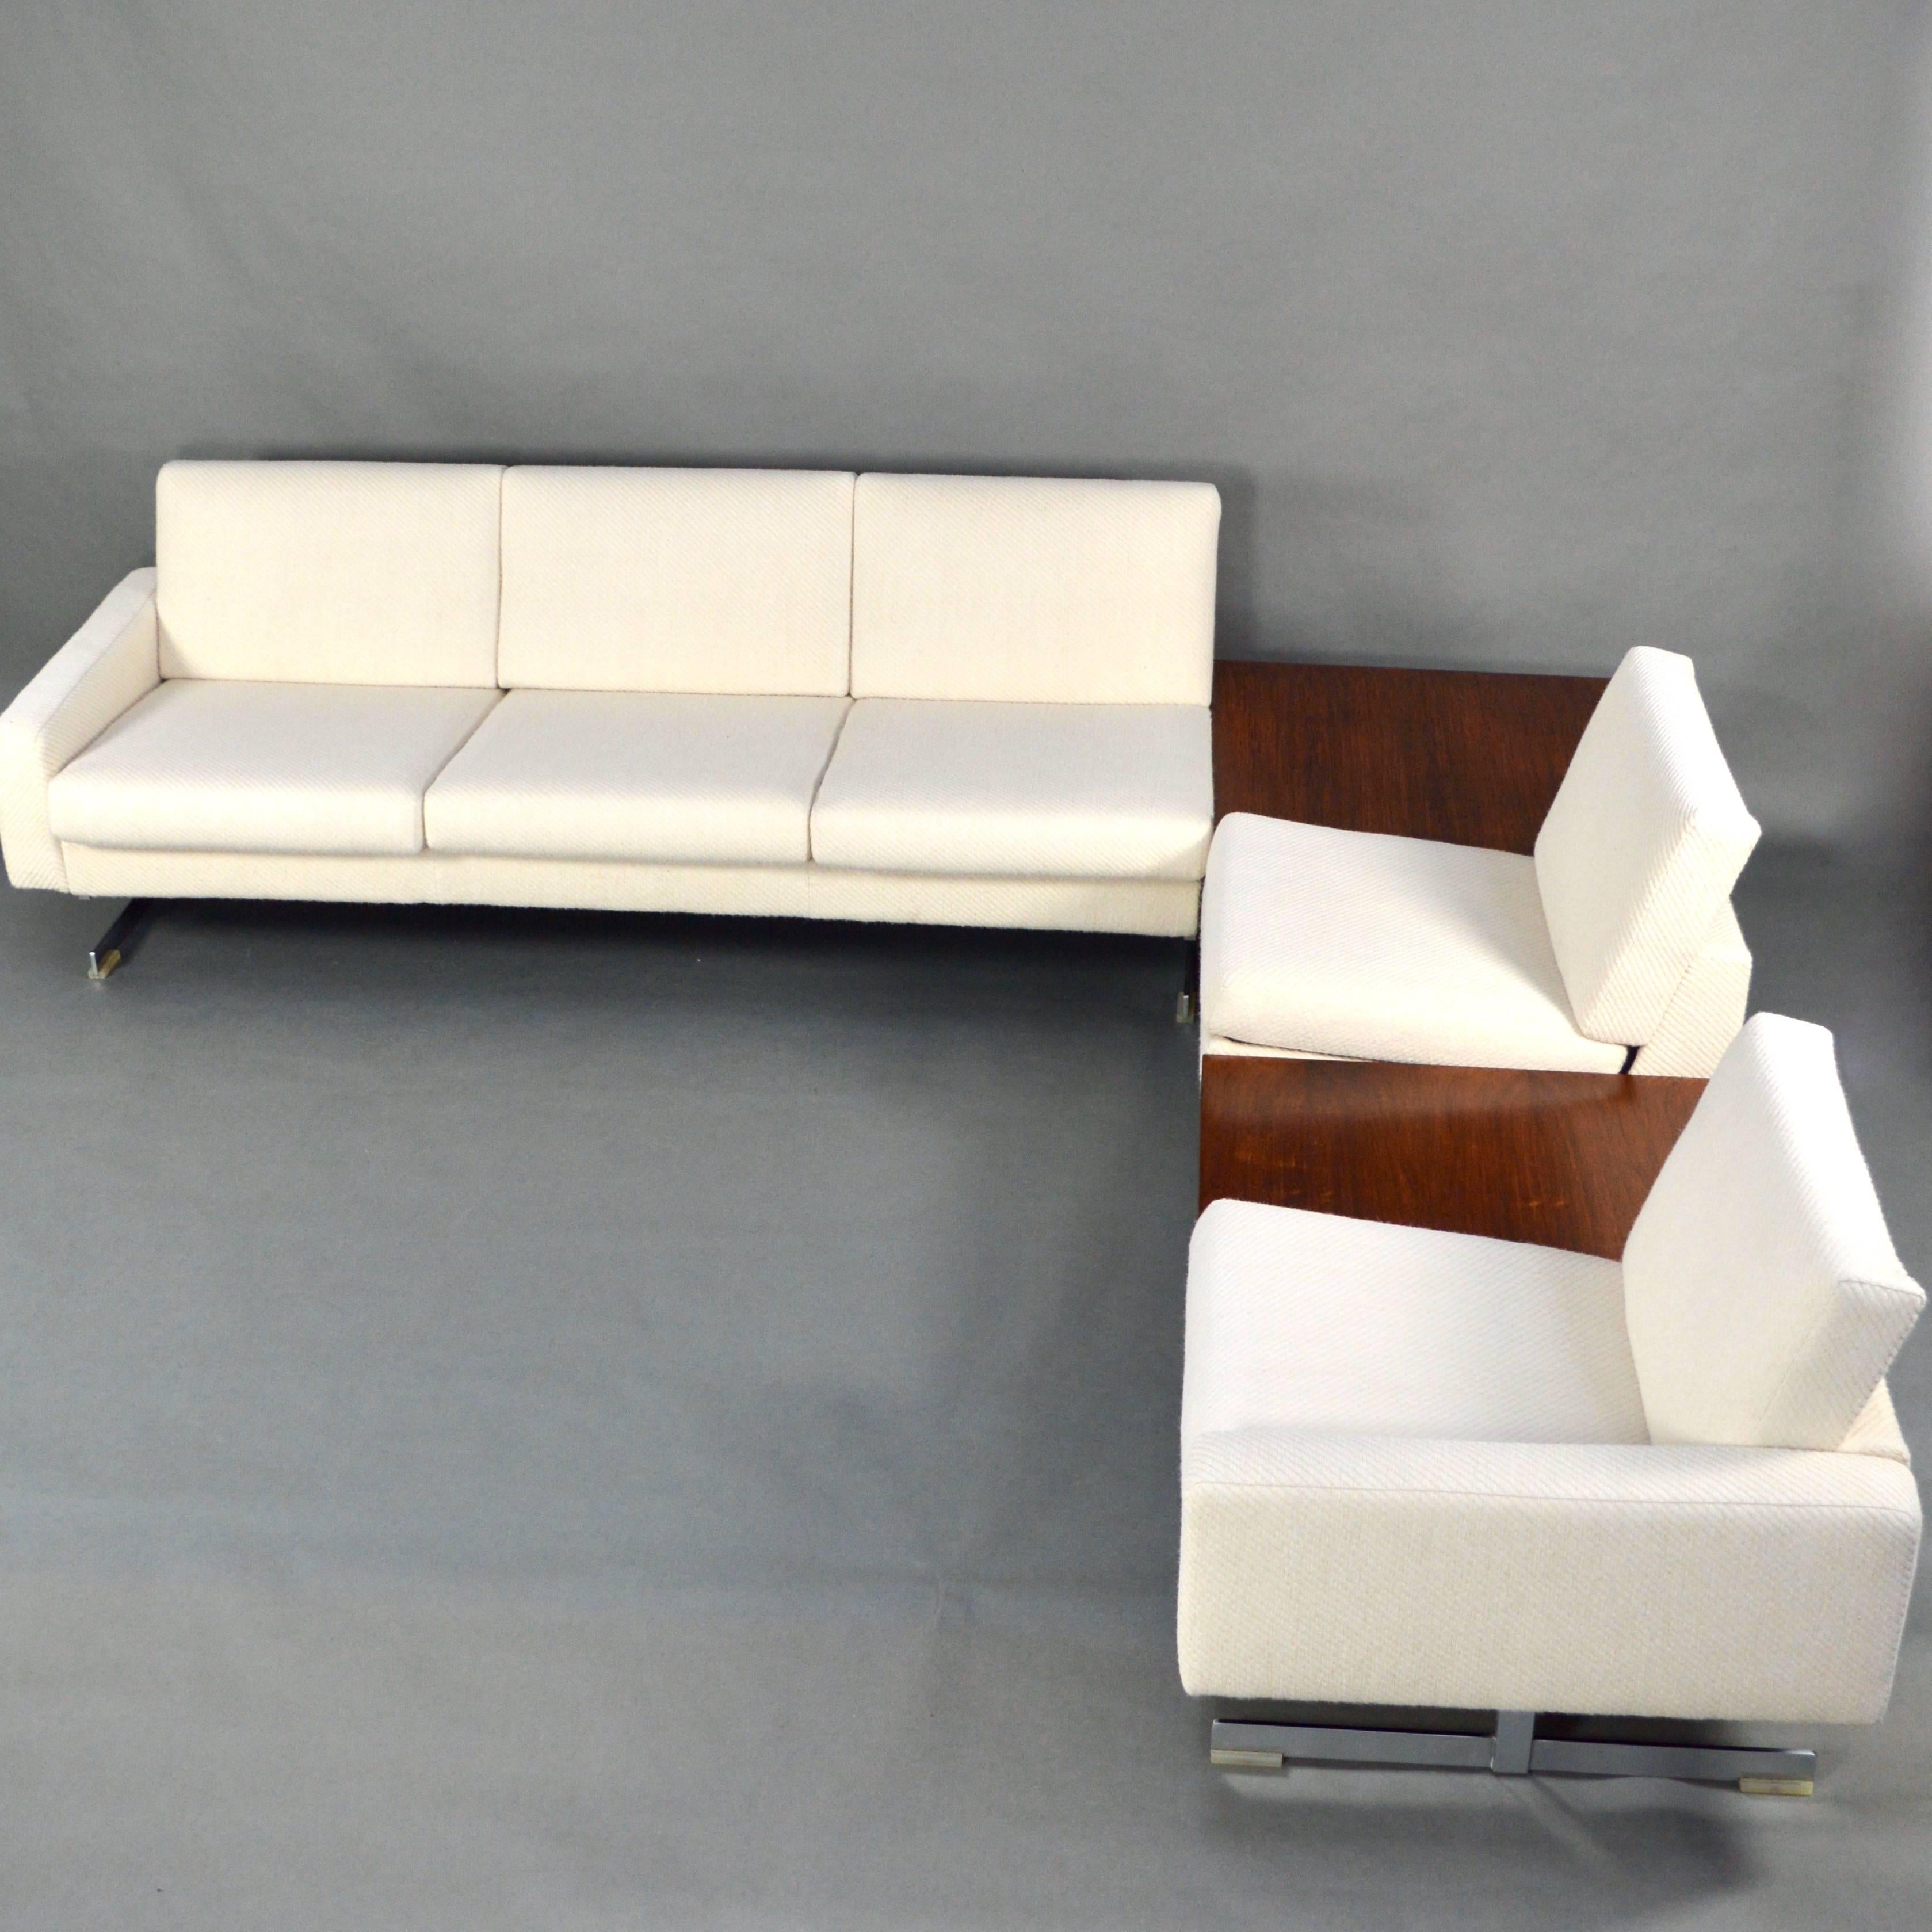 Fabric Rolf Benz 1st Edition Pluraform Sofa with Rosewood Coffee Tables, 1964